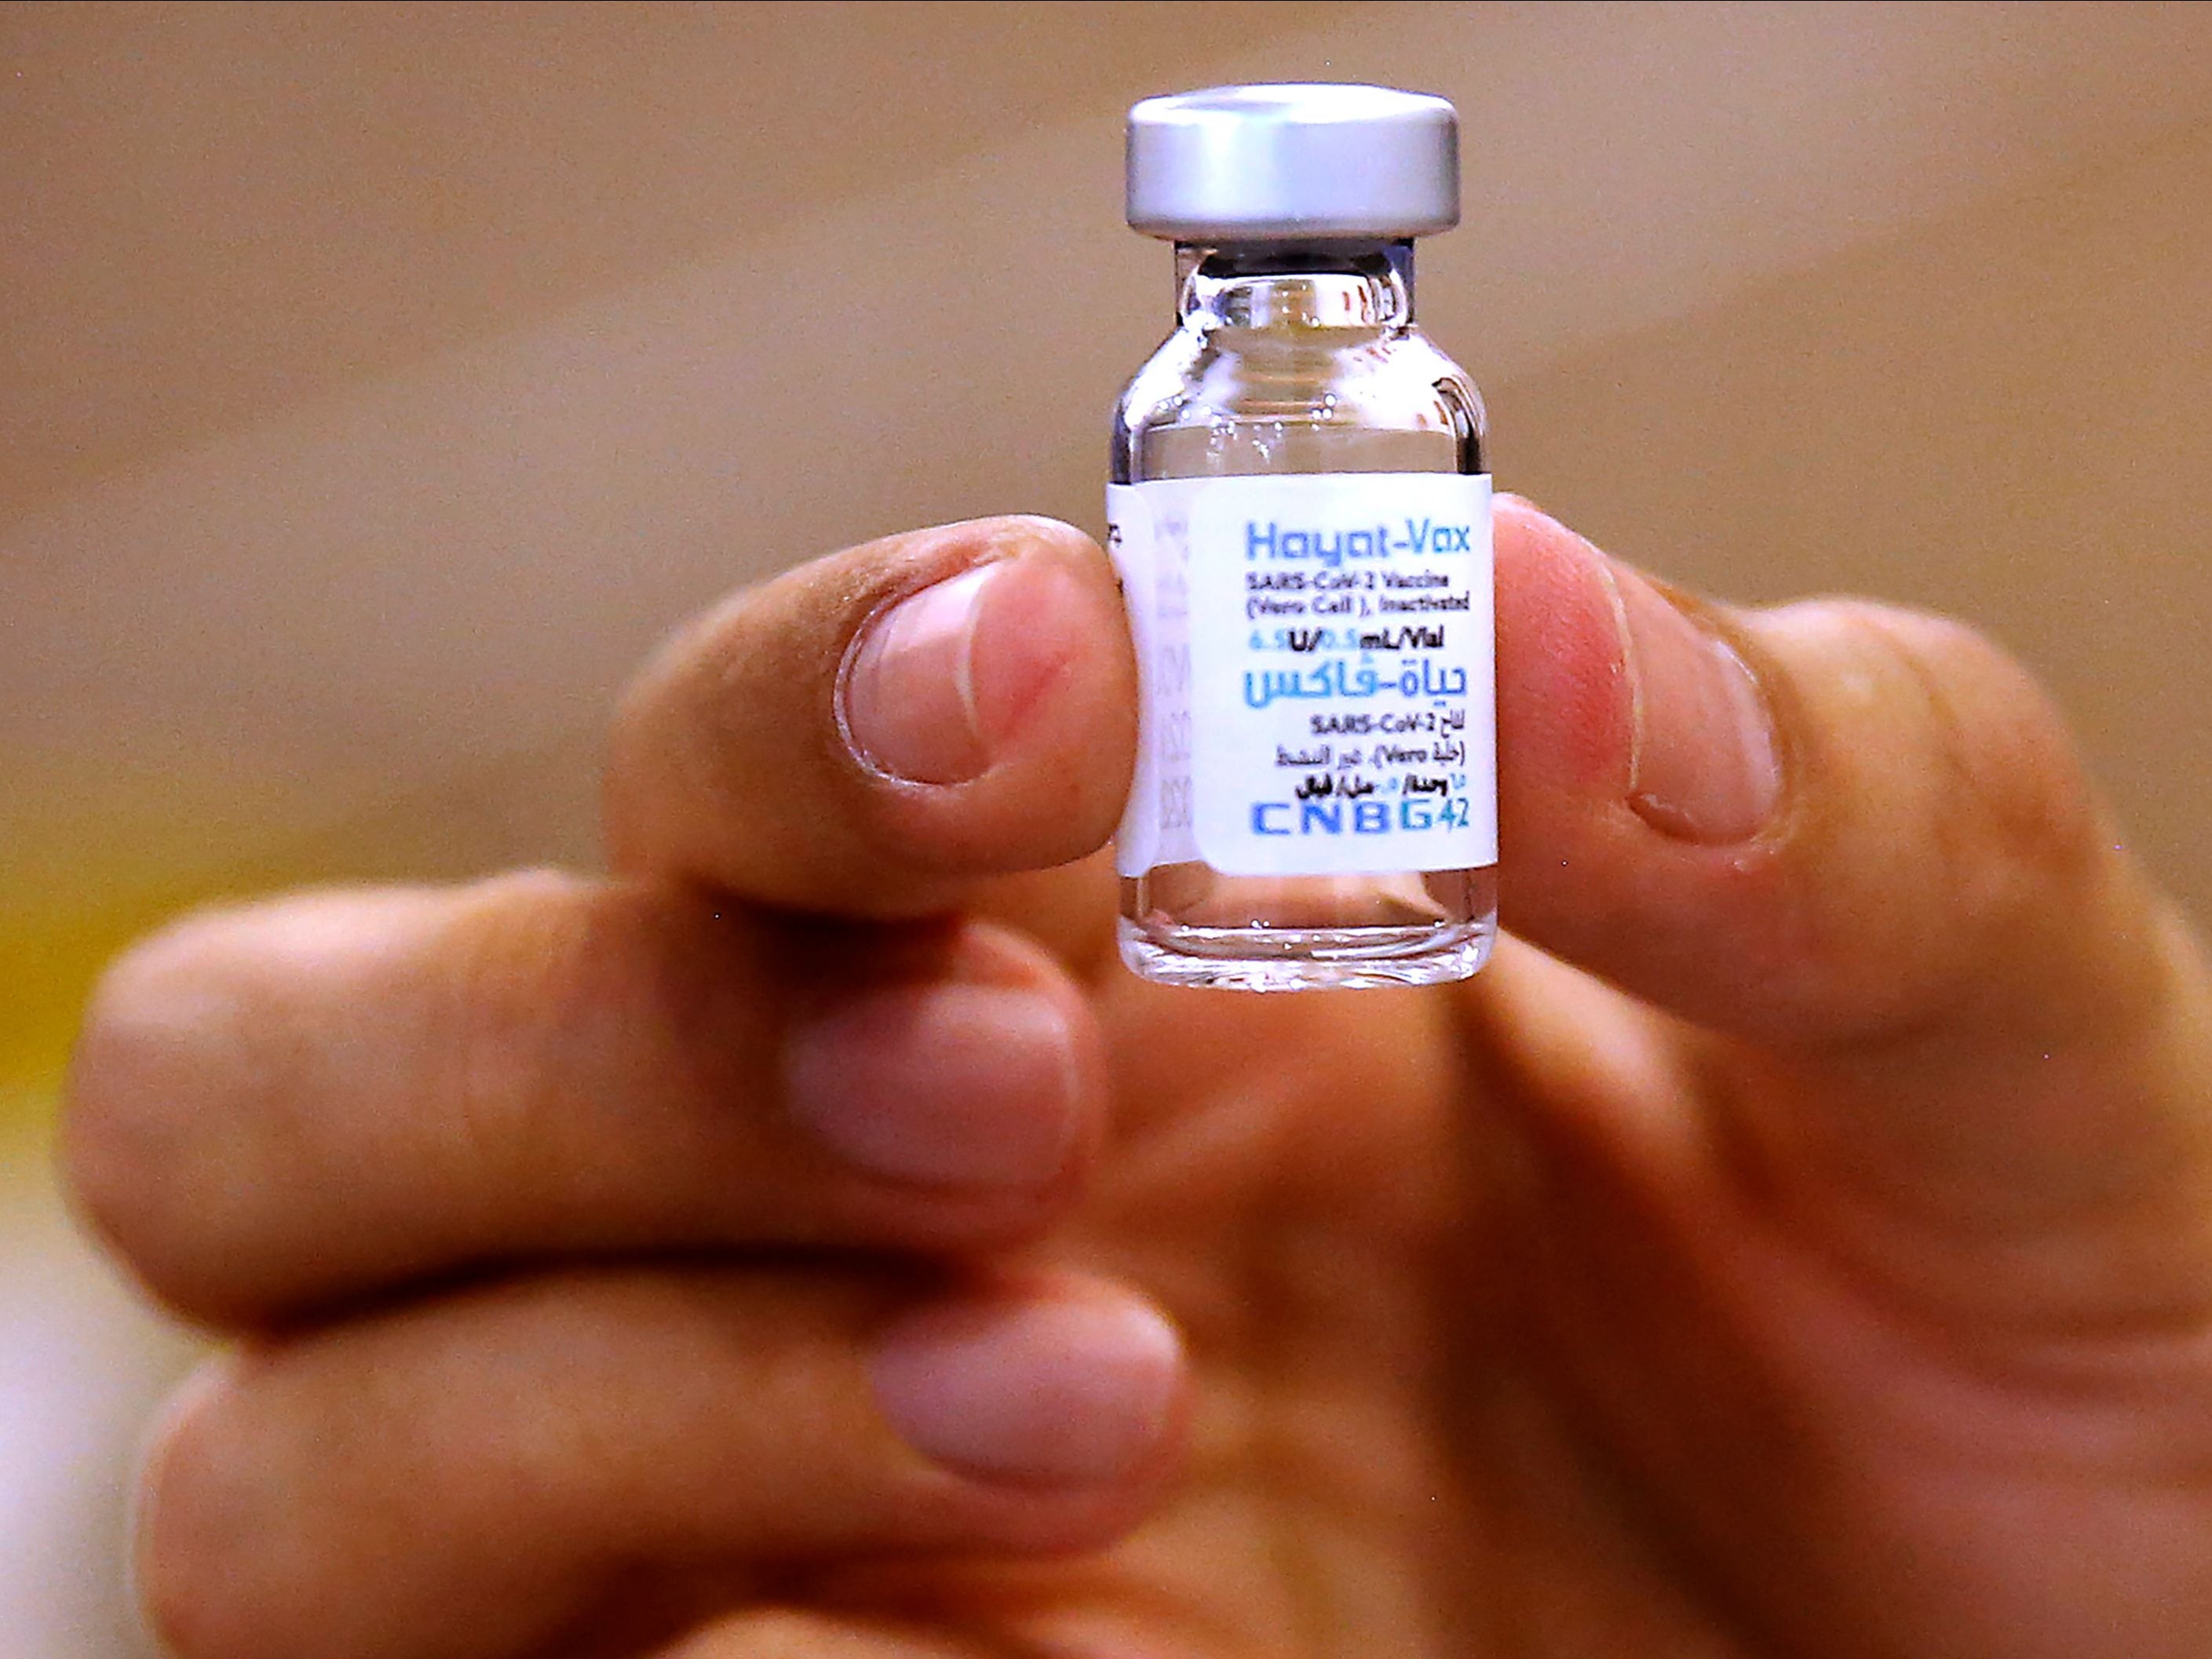 China has approved two vaccines for children ages three to 17